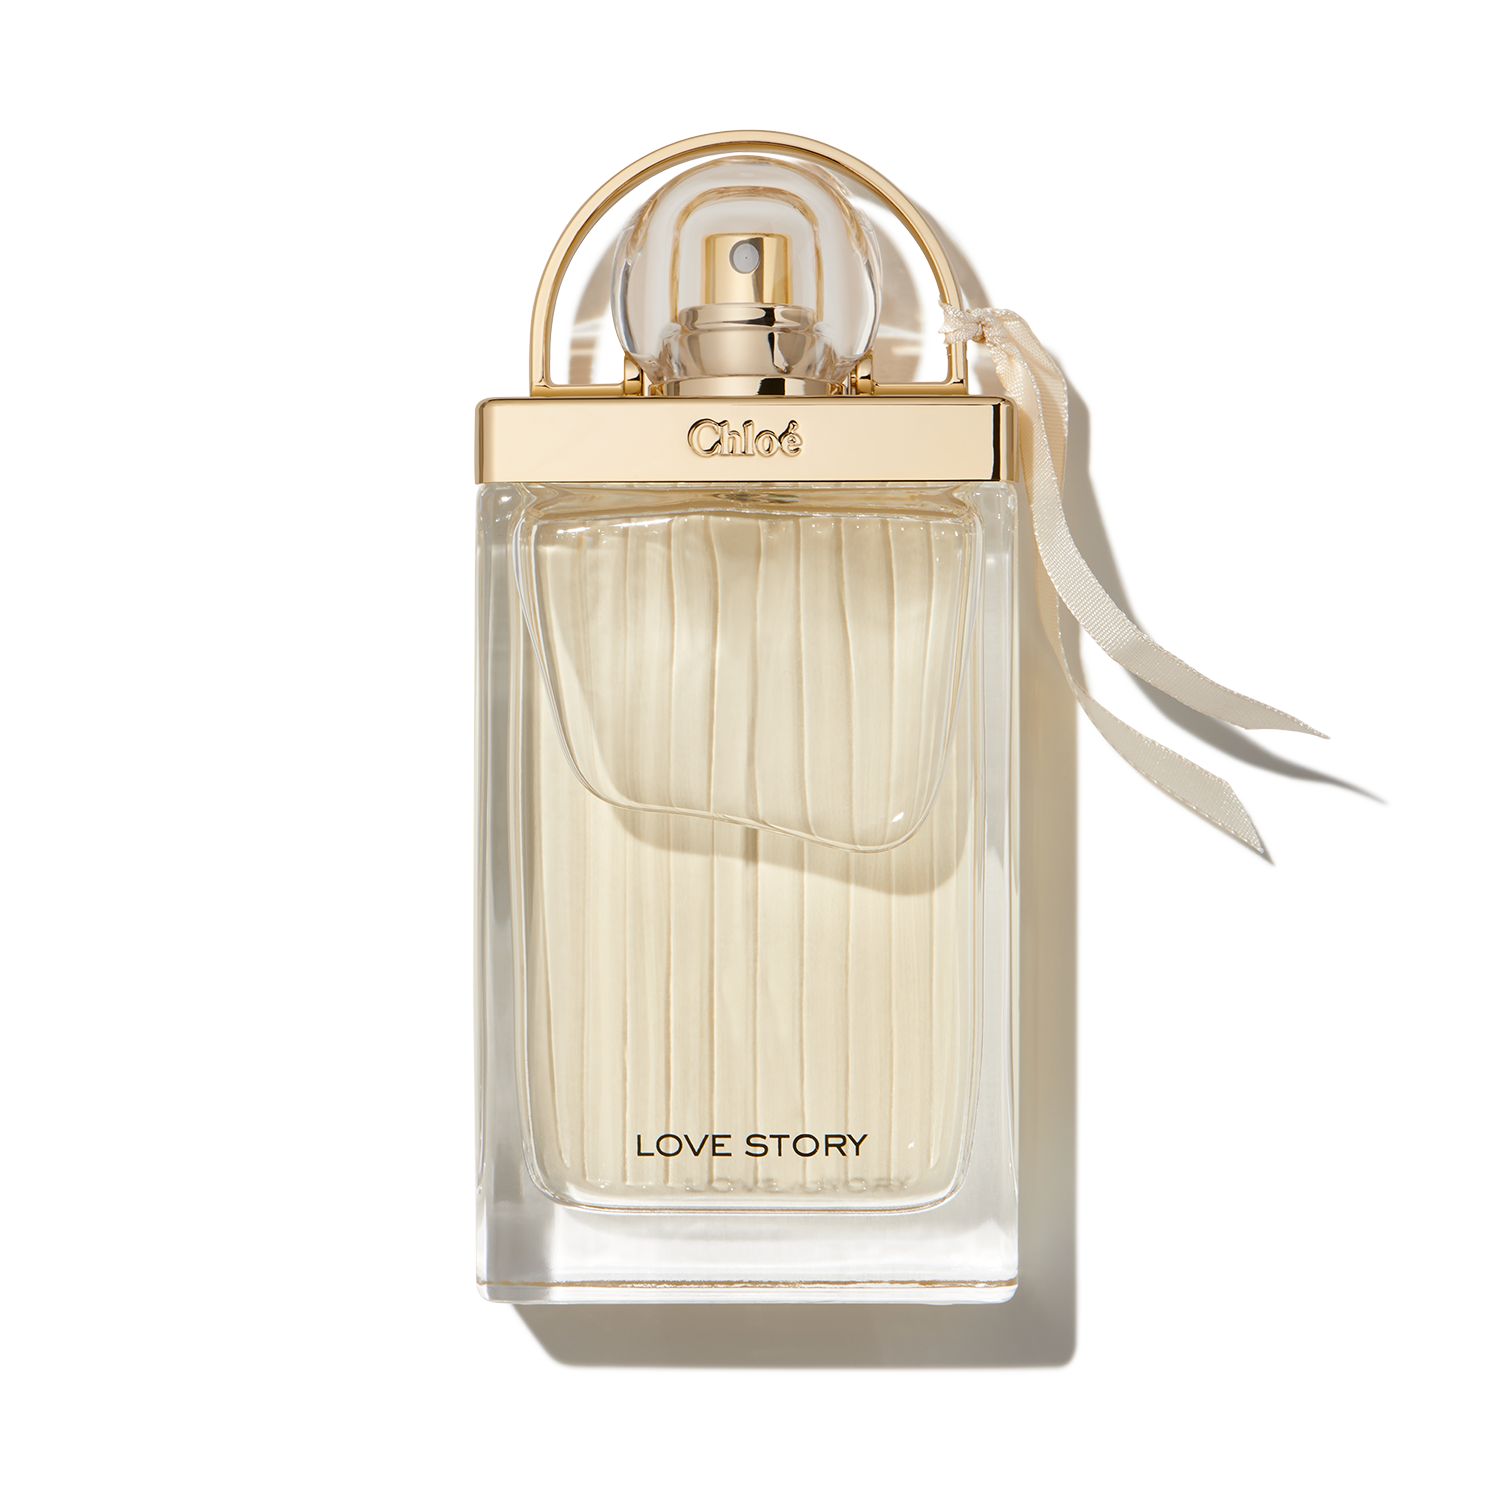 Love Story by Chloe $16.95/month | Scentbird